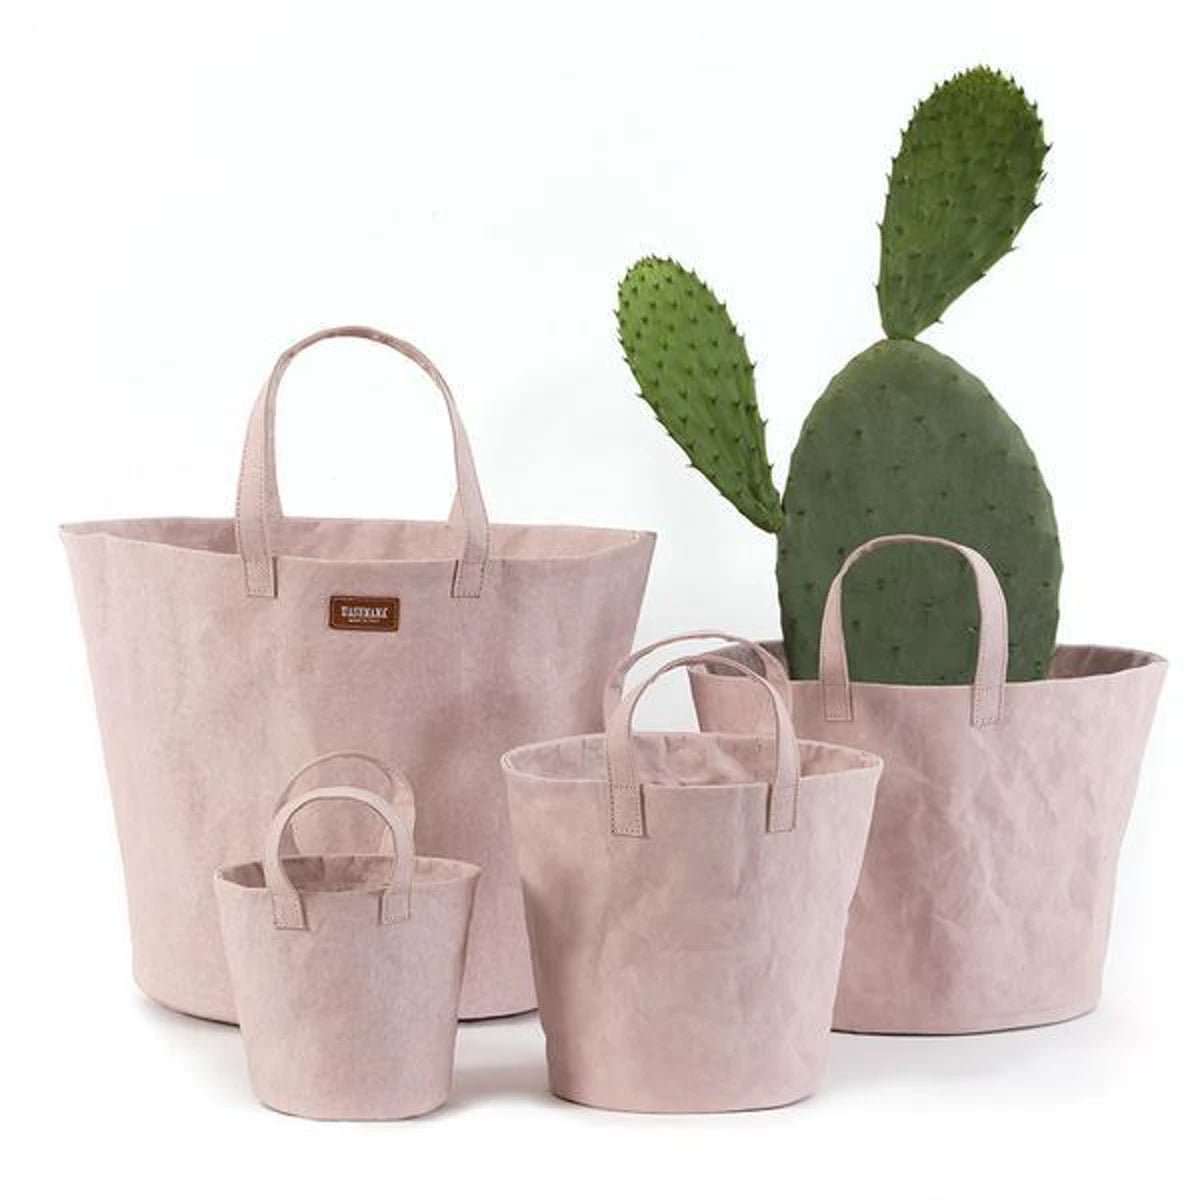 Four individual washable paper baskets are shown in varying sizes. The one at right contains a large cactus, and they are shown in a pale pink colour.